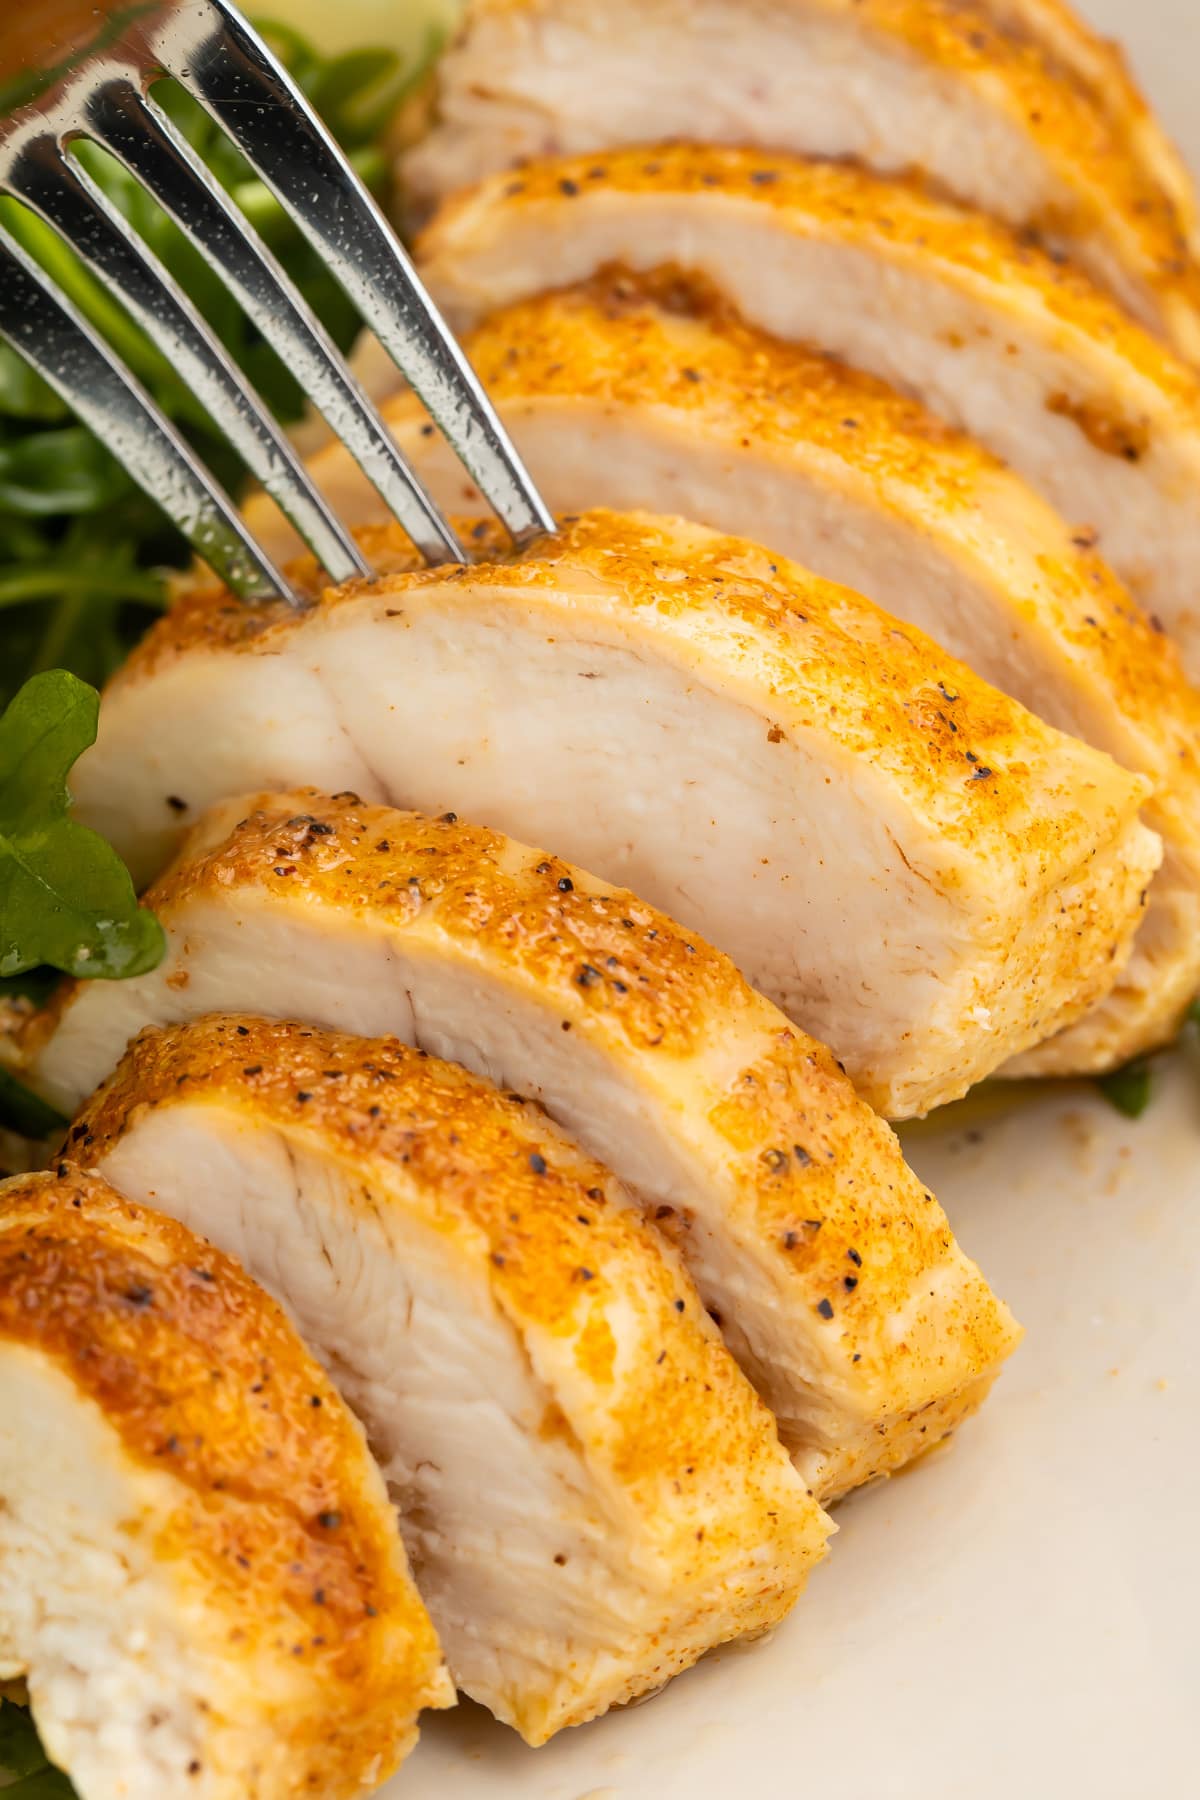 A fork pierces and lifts a slice of an Instant Pot chicken breast off a plate away from other slices of chicken.